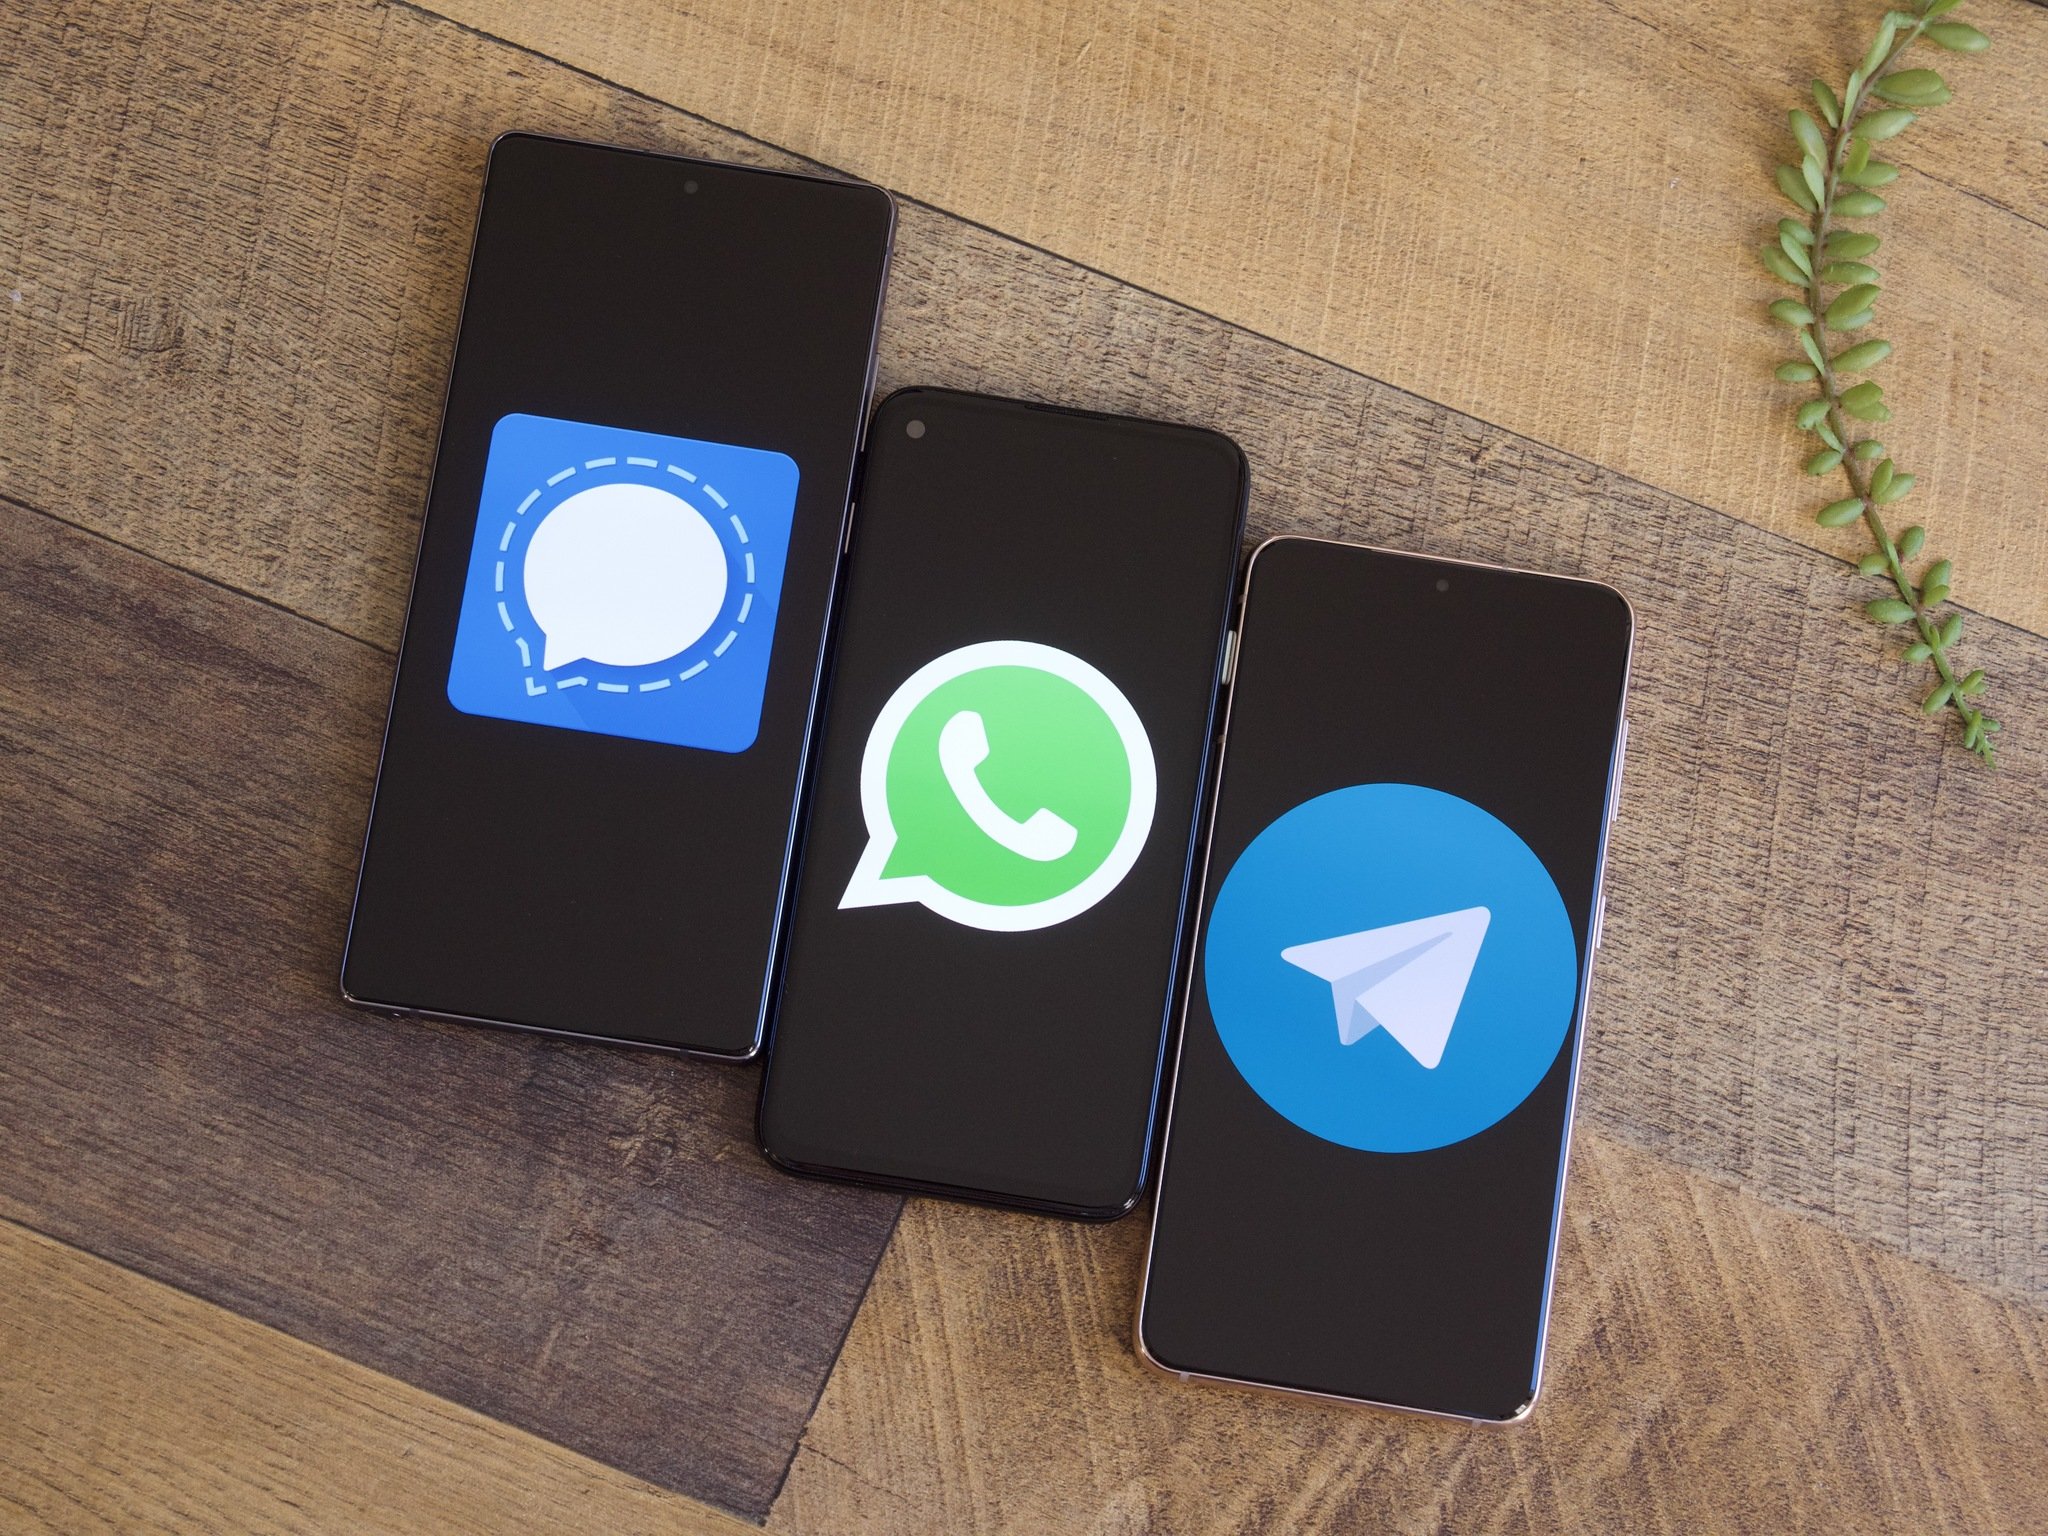 Signal, WhatsApp, and Telegram logos on Android phones